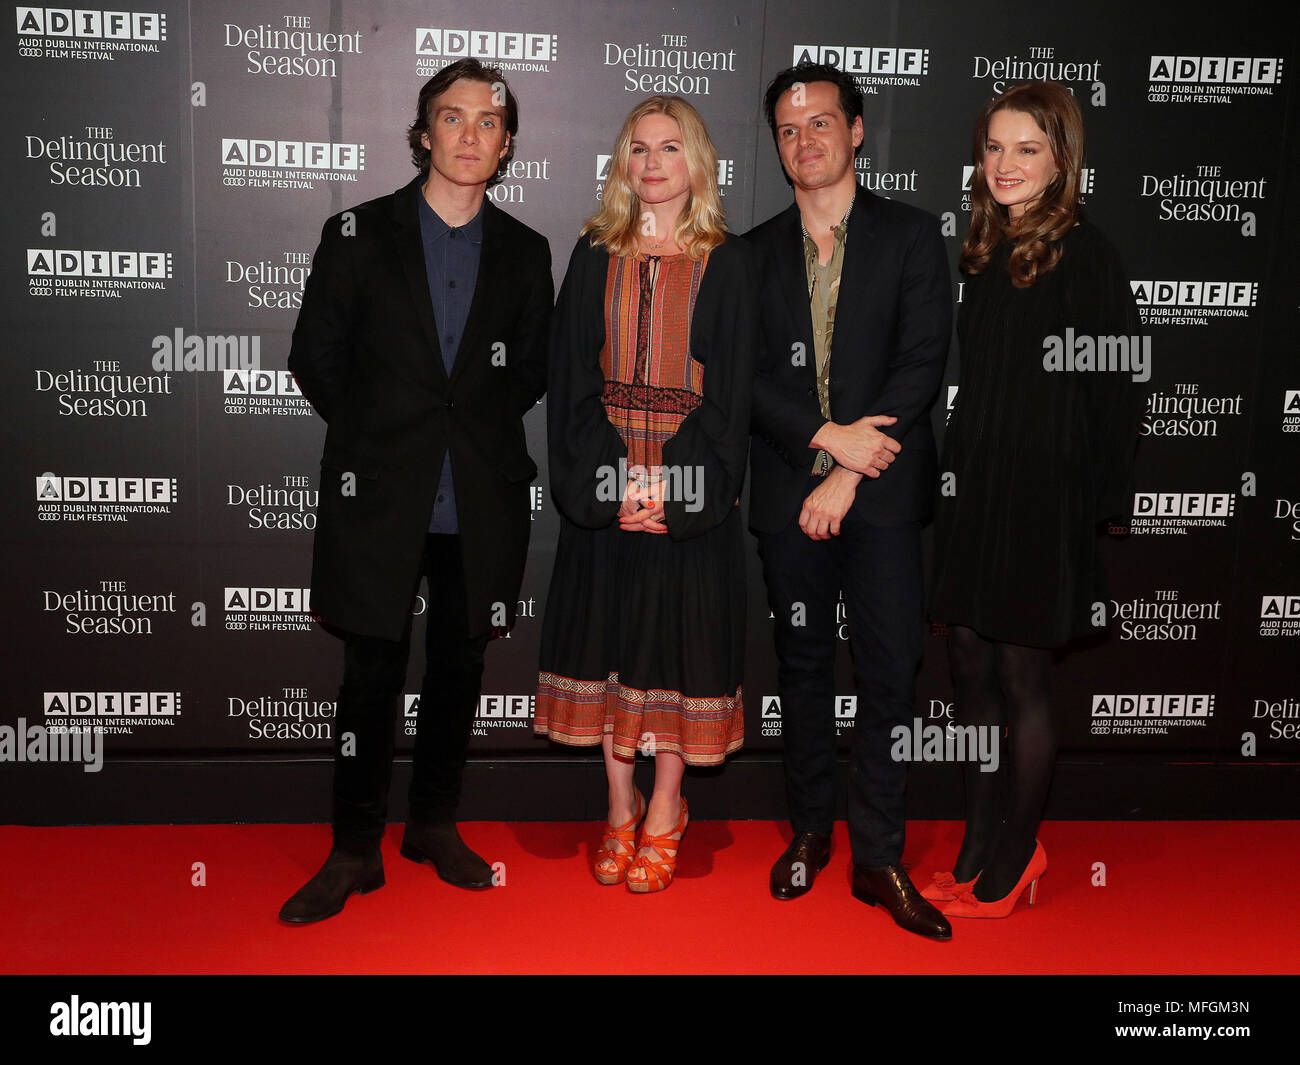 Actors (from left) Cillian Murphy, Eva Birthistle, Andrew Scott and Catherine Walker arrive for the world premiere of 'The Delinquent Season' at Cineworld in Dublin. Stock Photo